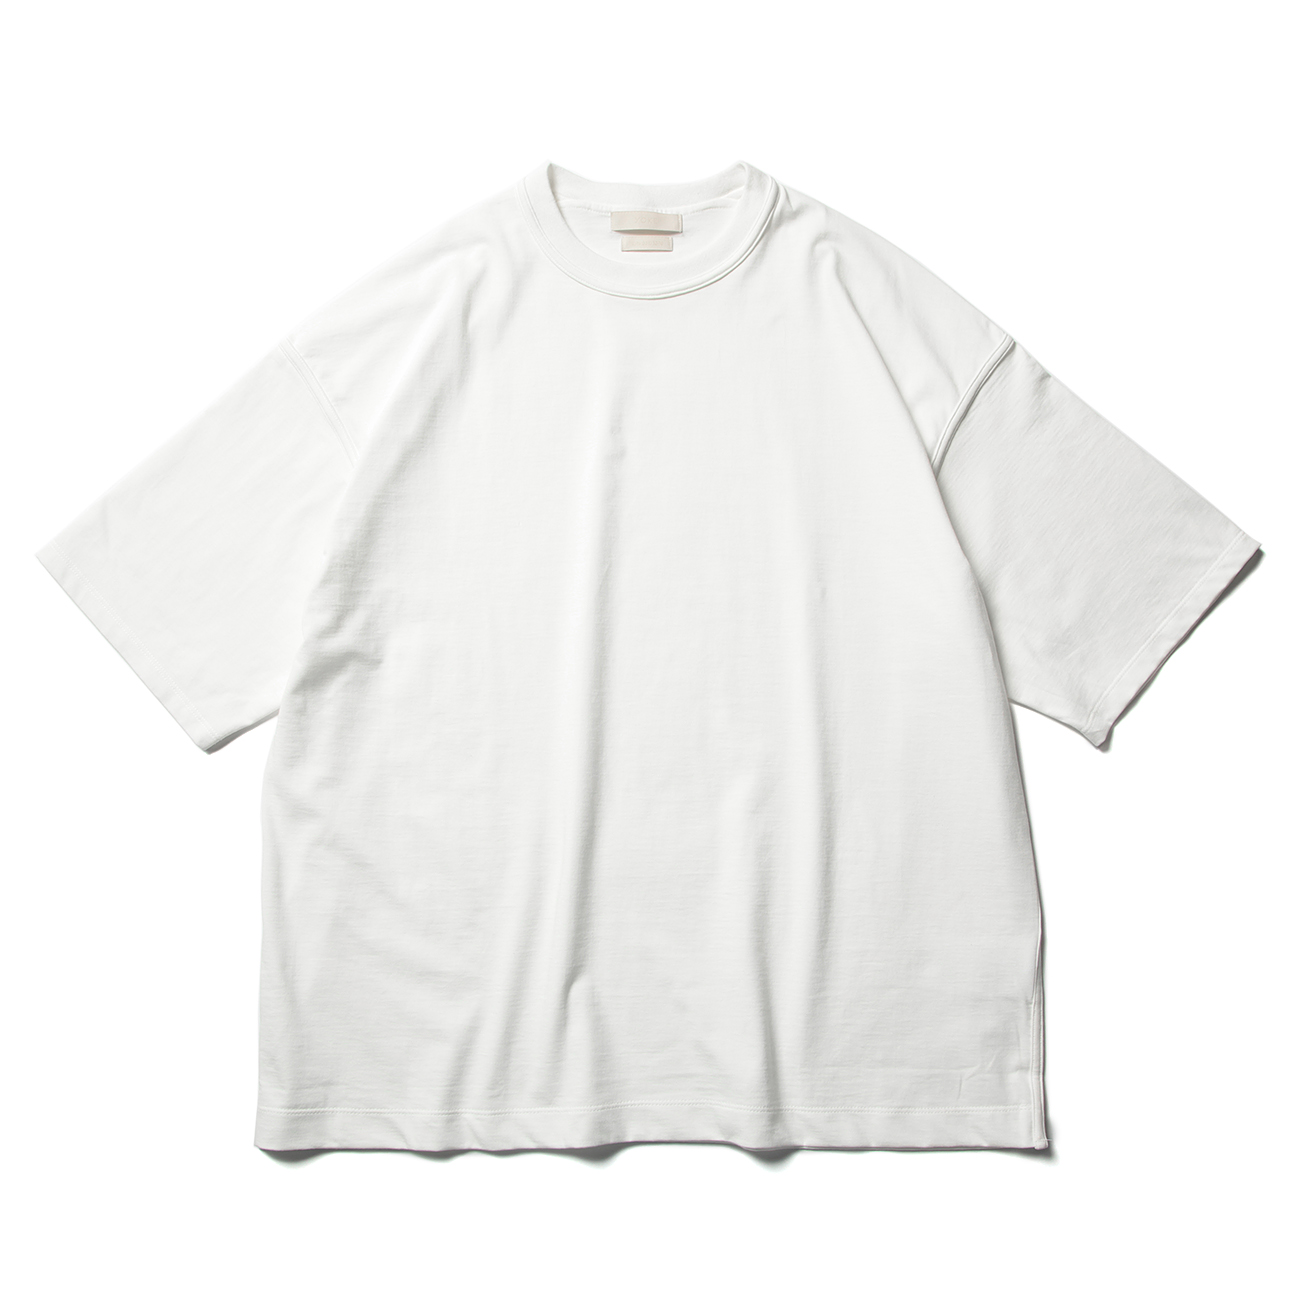 OVERSIZED INSIDE-OUT T-SHIRT - White